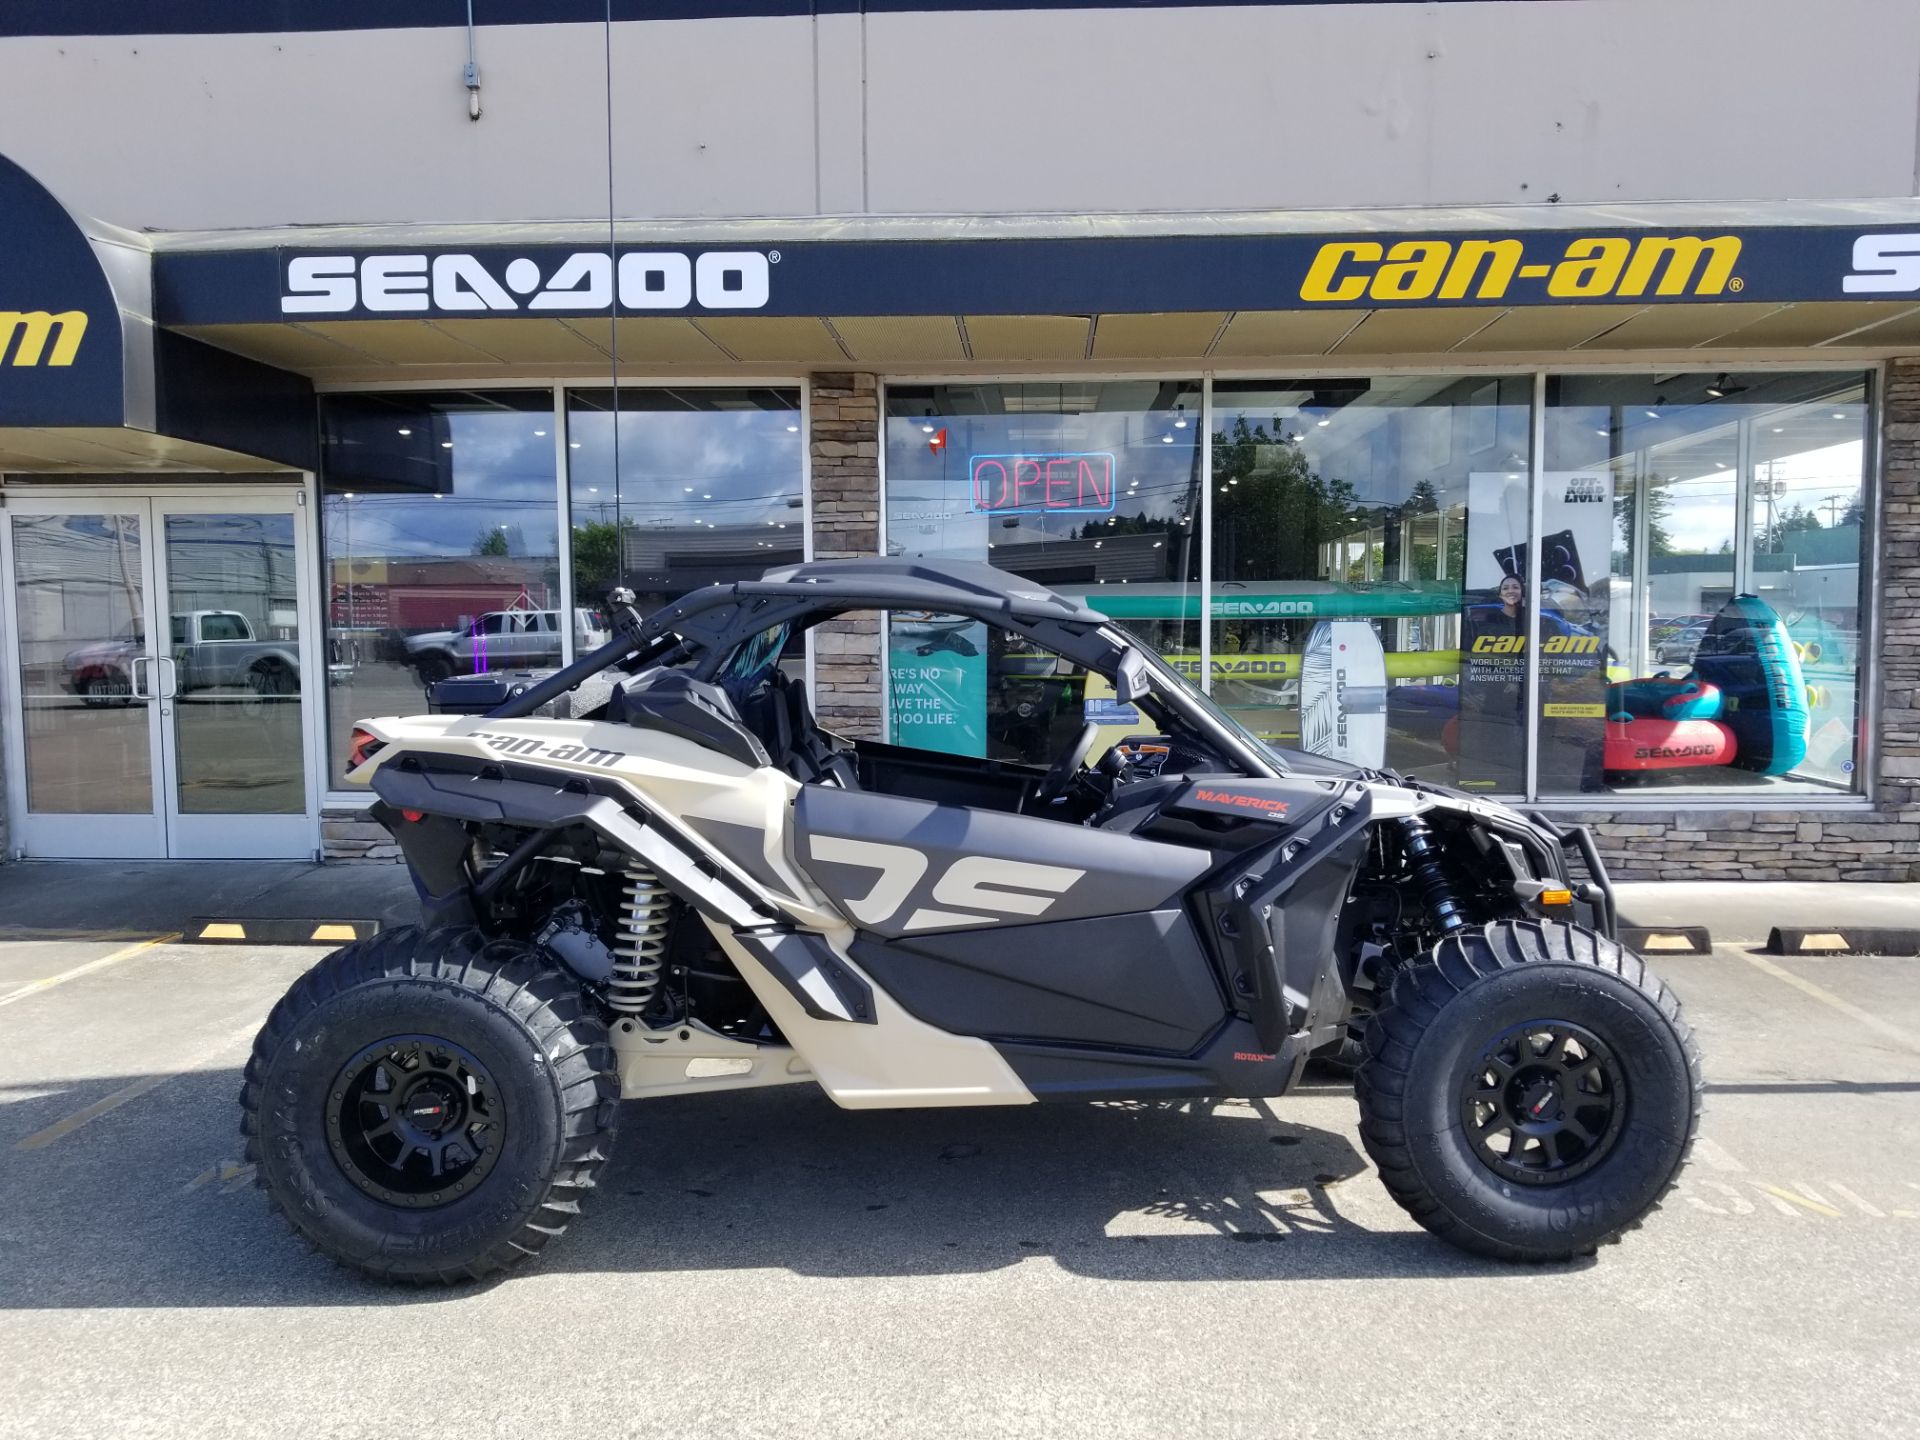 2022 Can-Am Maverick X3 DS Turbo in Coos Bay, Oregon - Photo 1